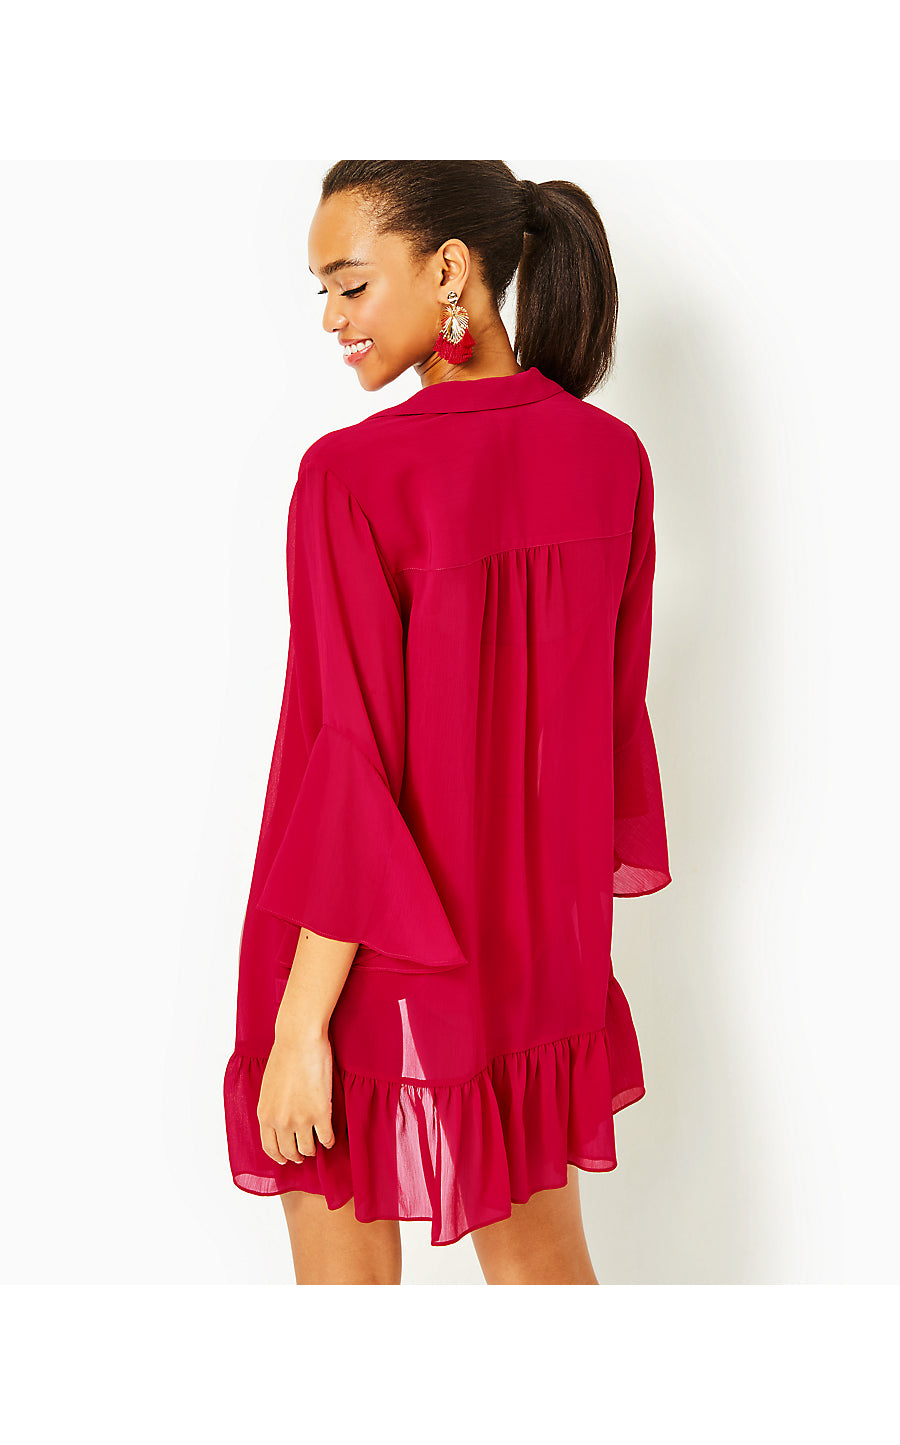 LINLEY COLLARED COVERUP - POINSETTIA RED